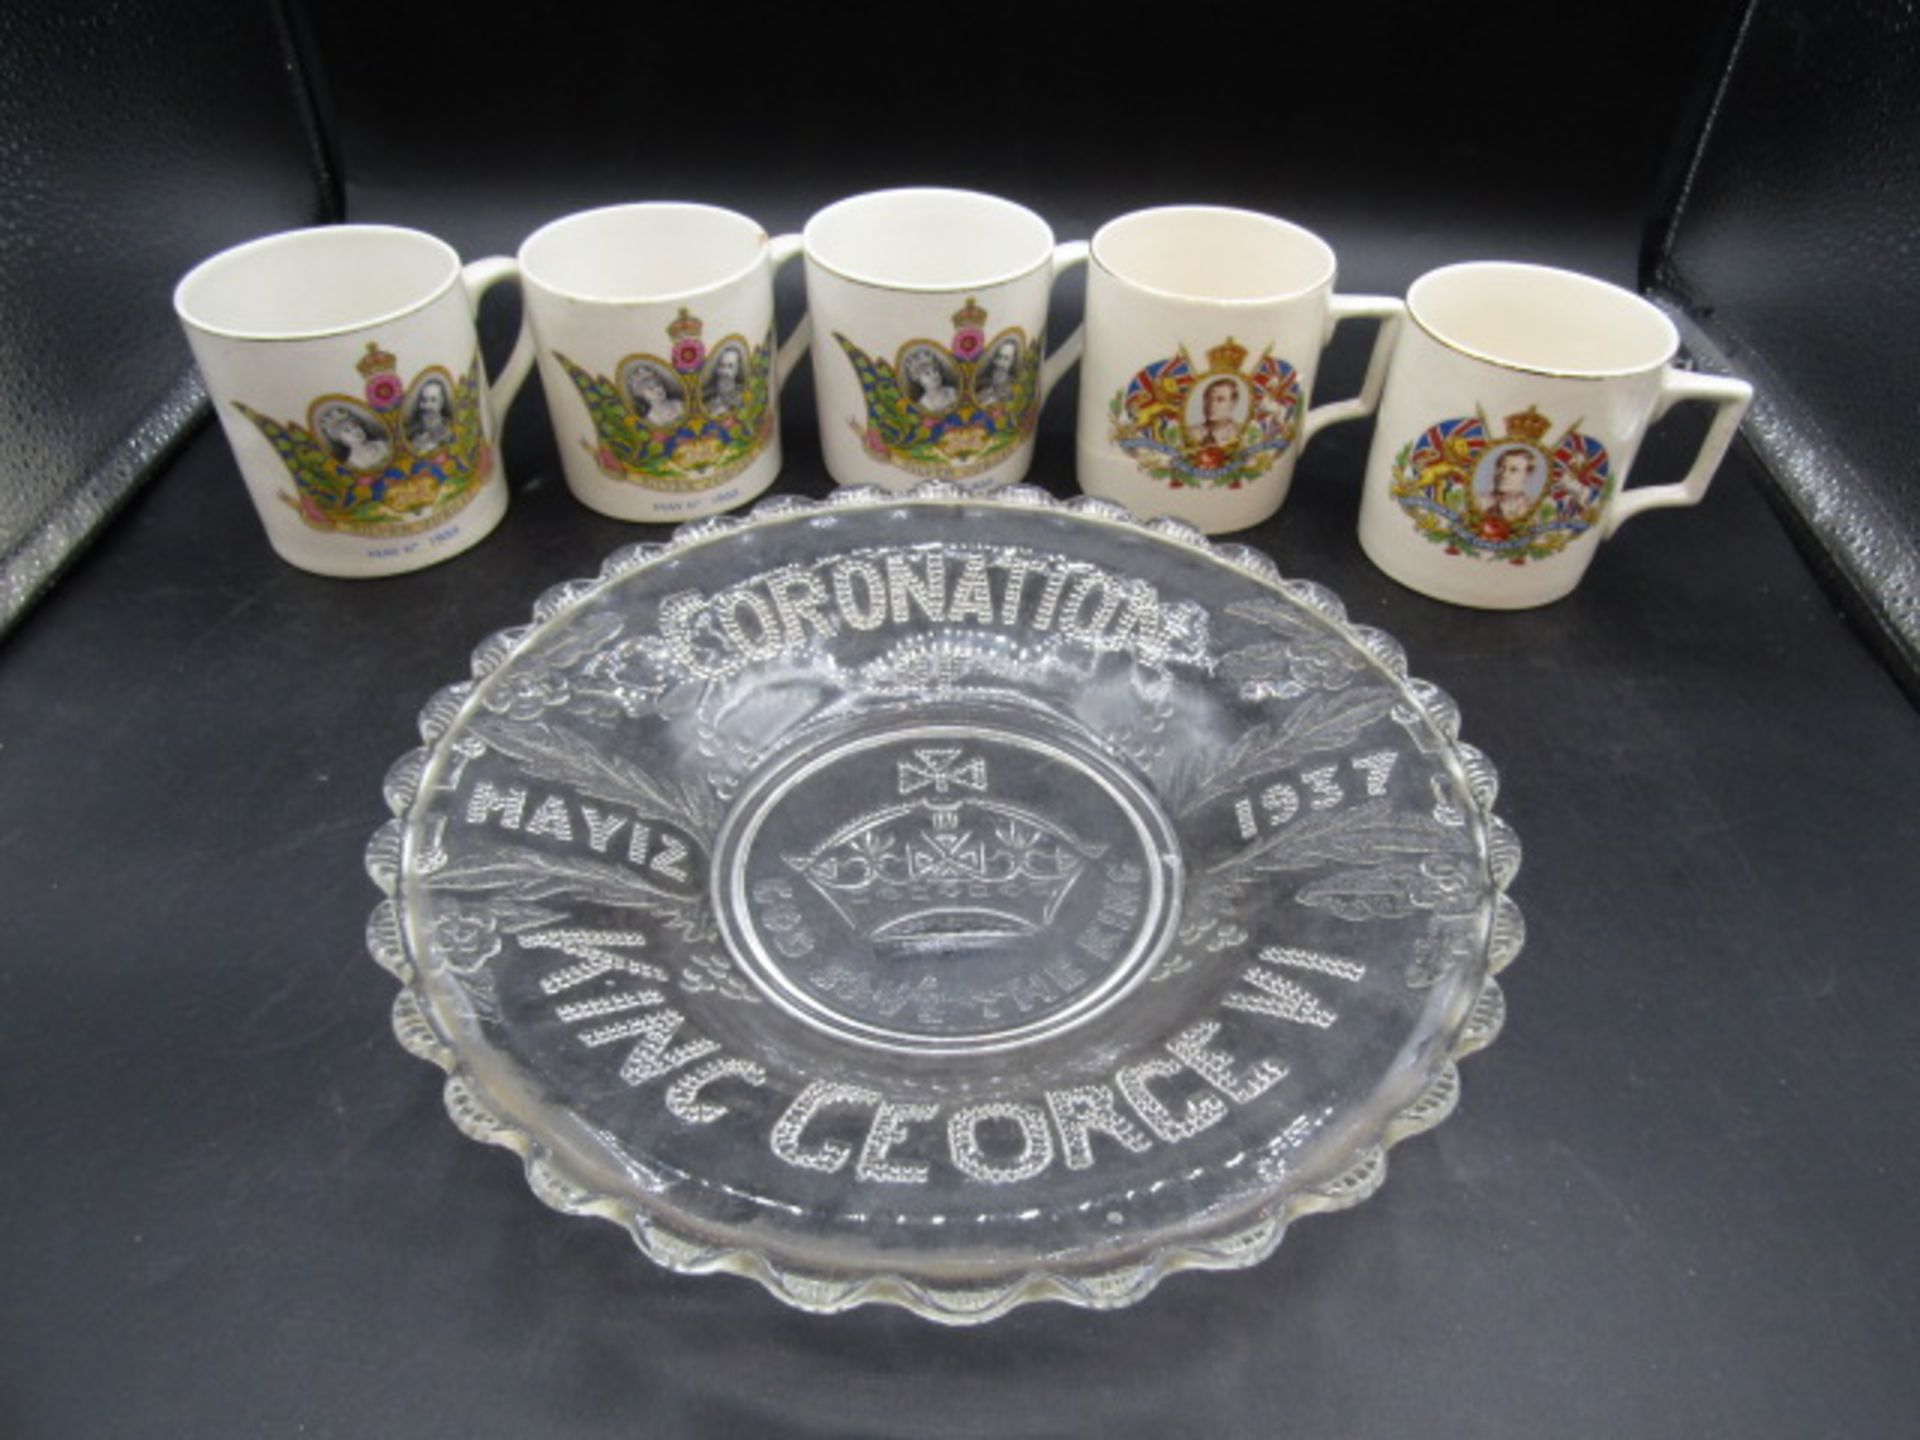 Commemorative mugs and glass dish  one cup is cracked, one has large chip as pictured